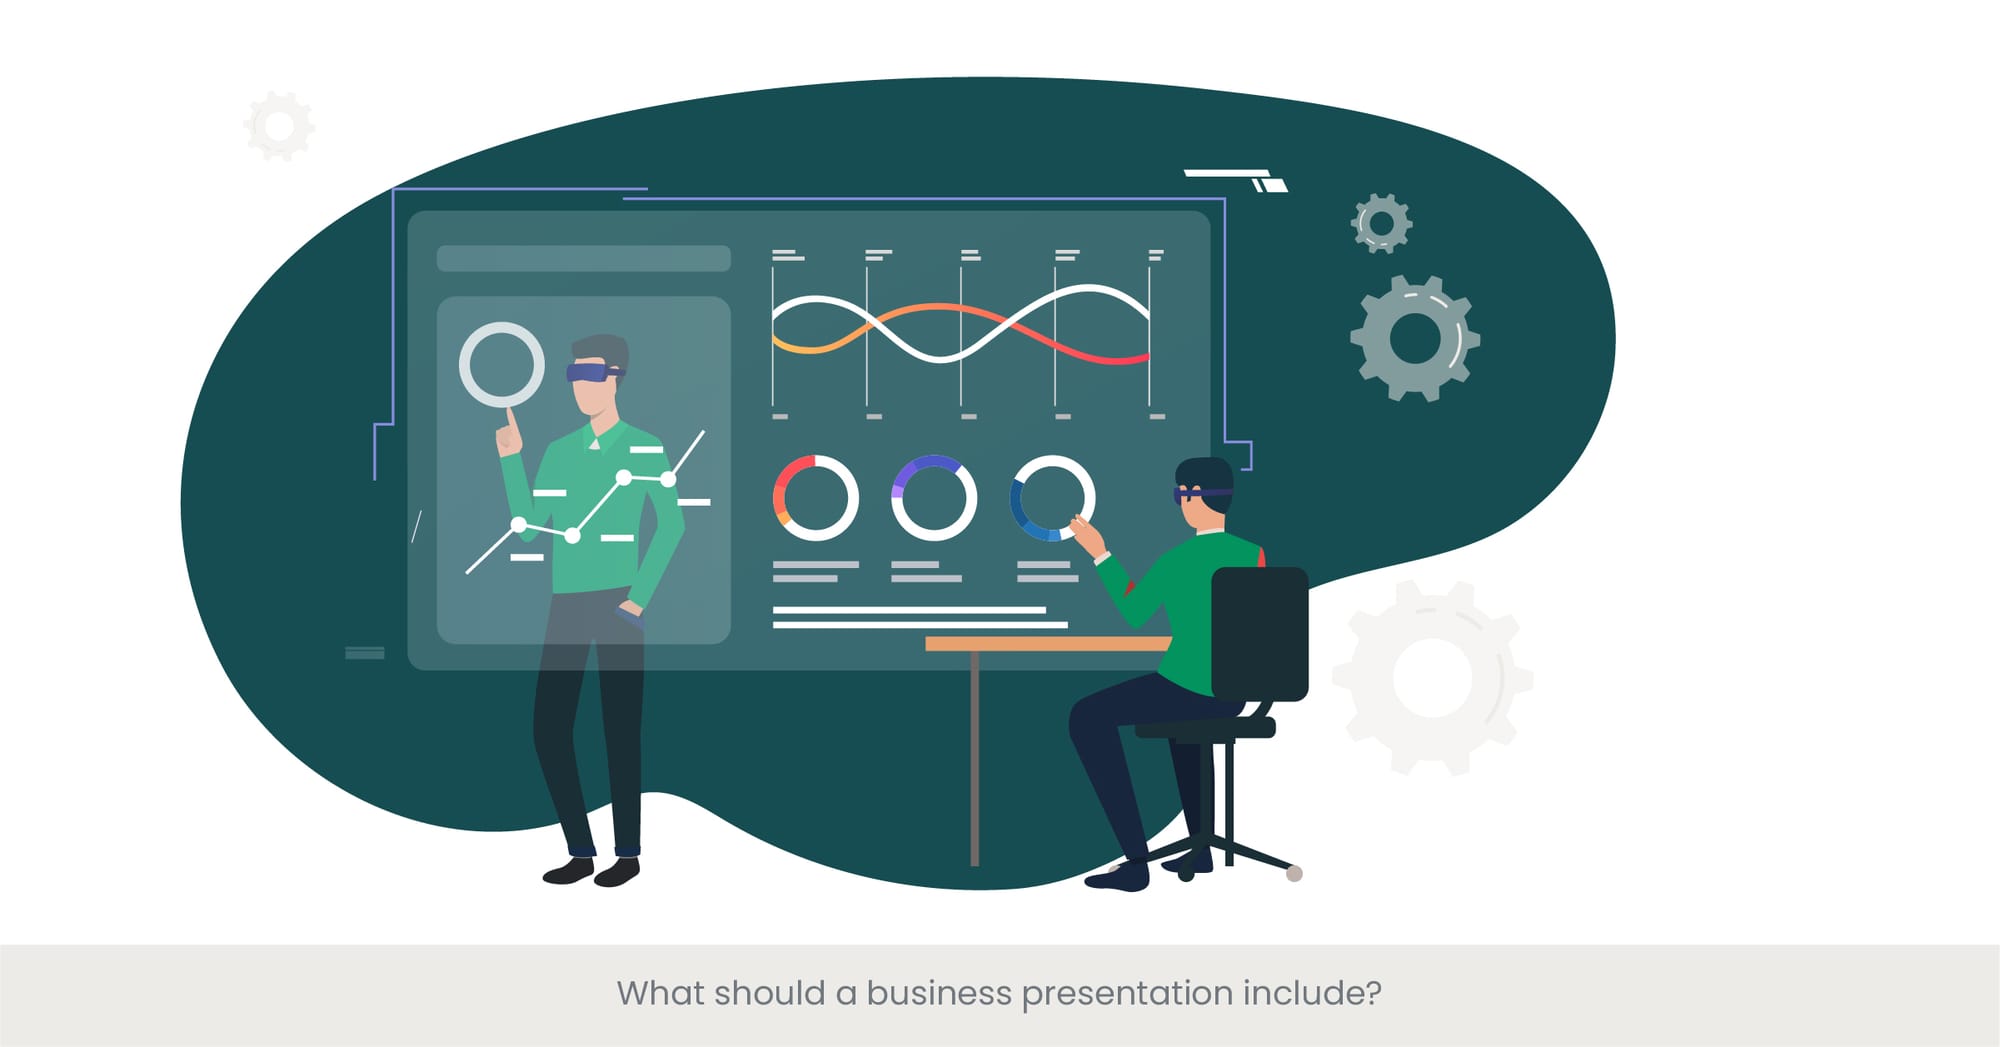 What should a business presentation include